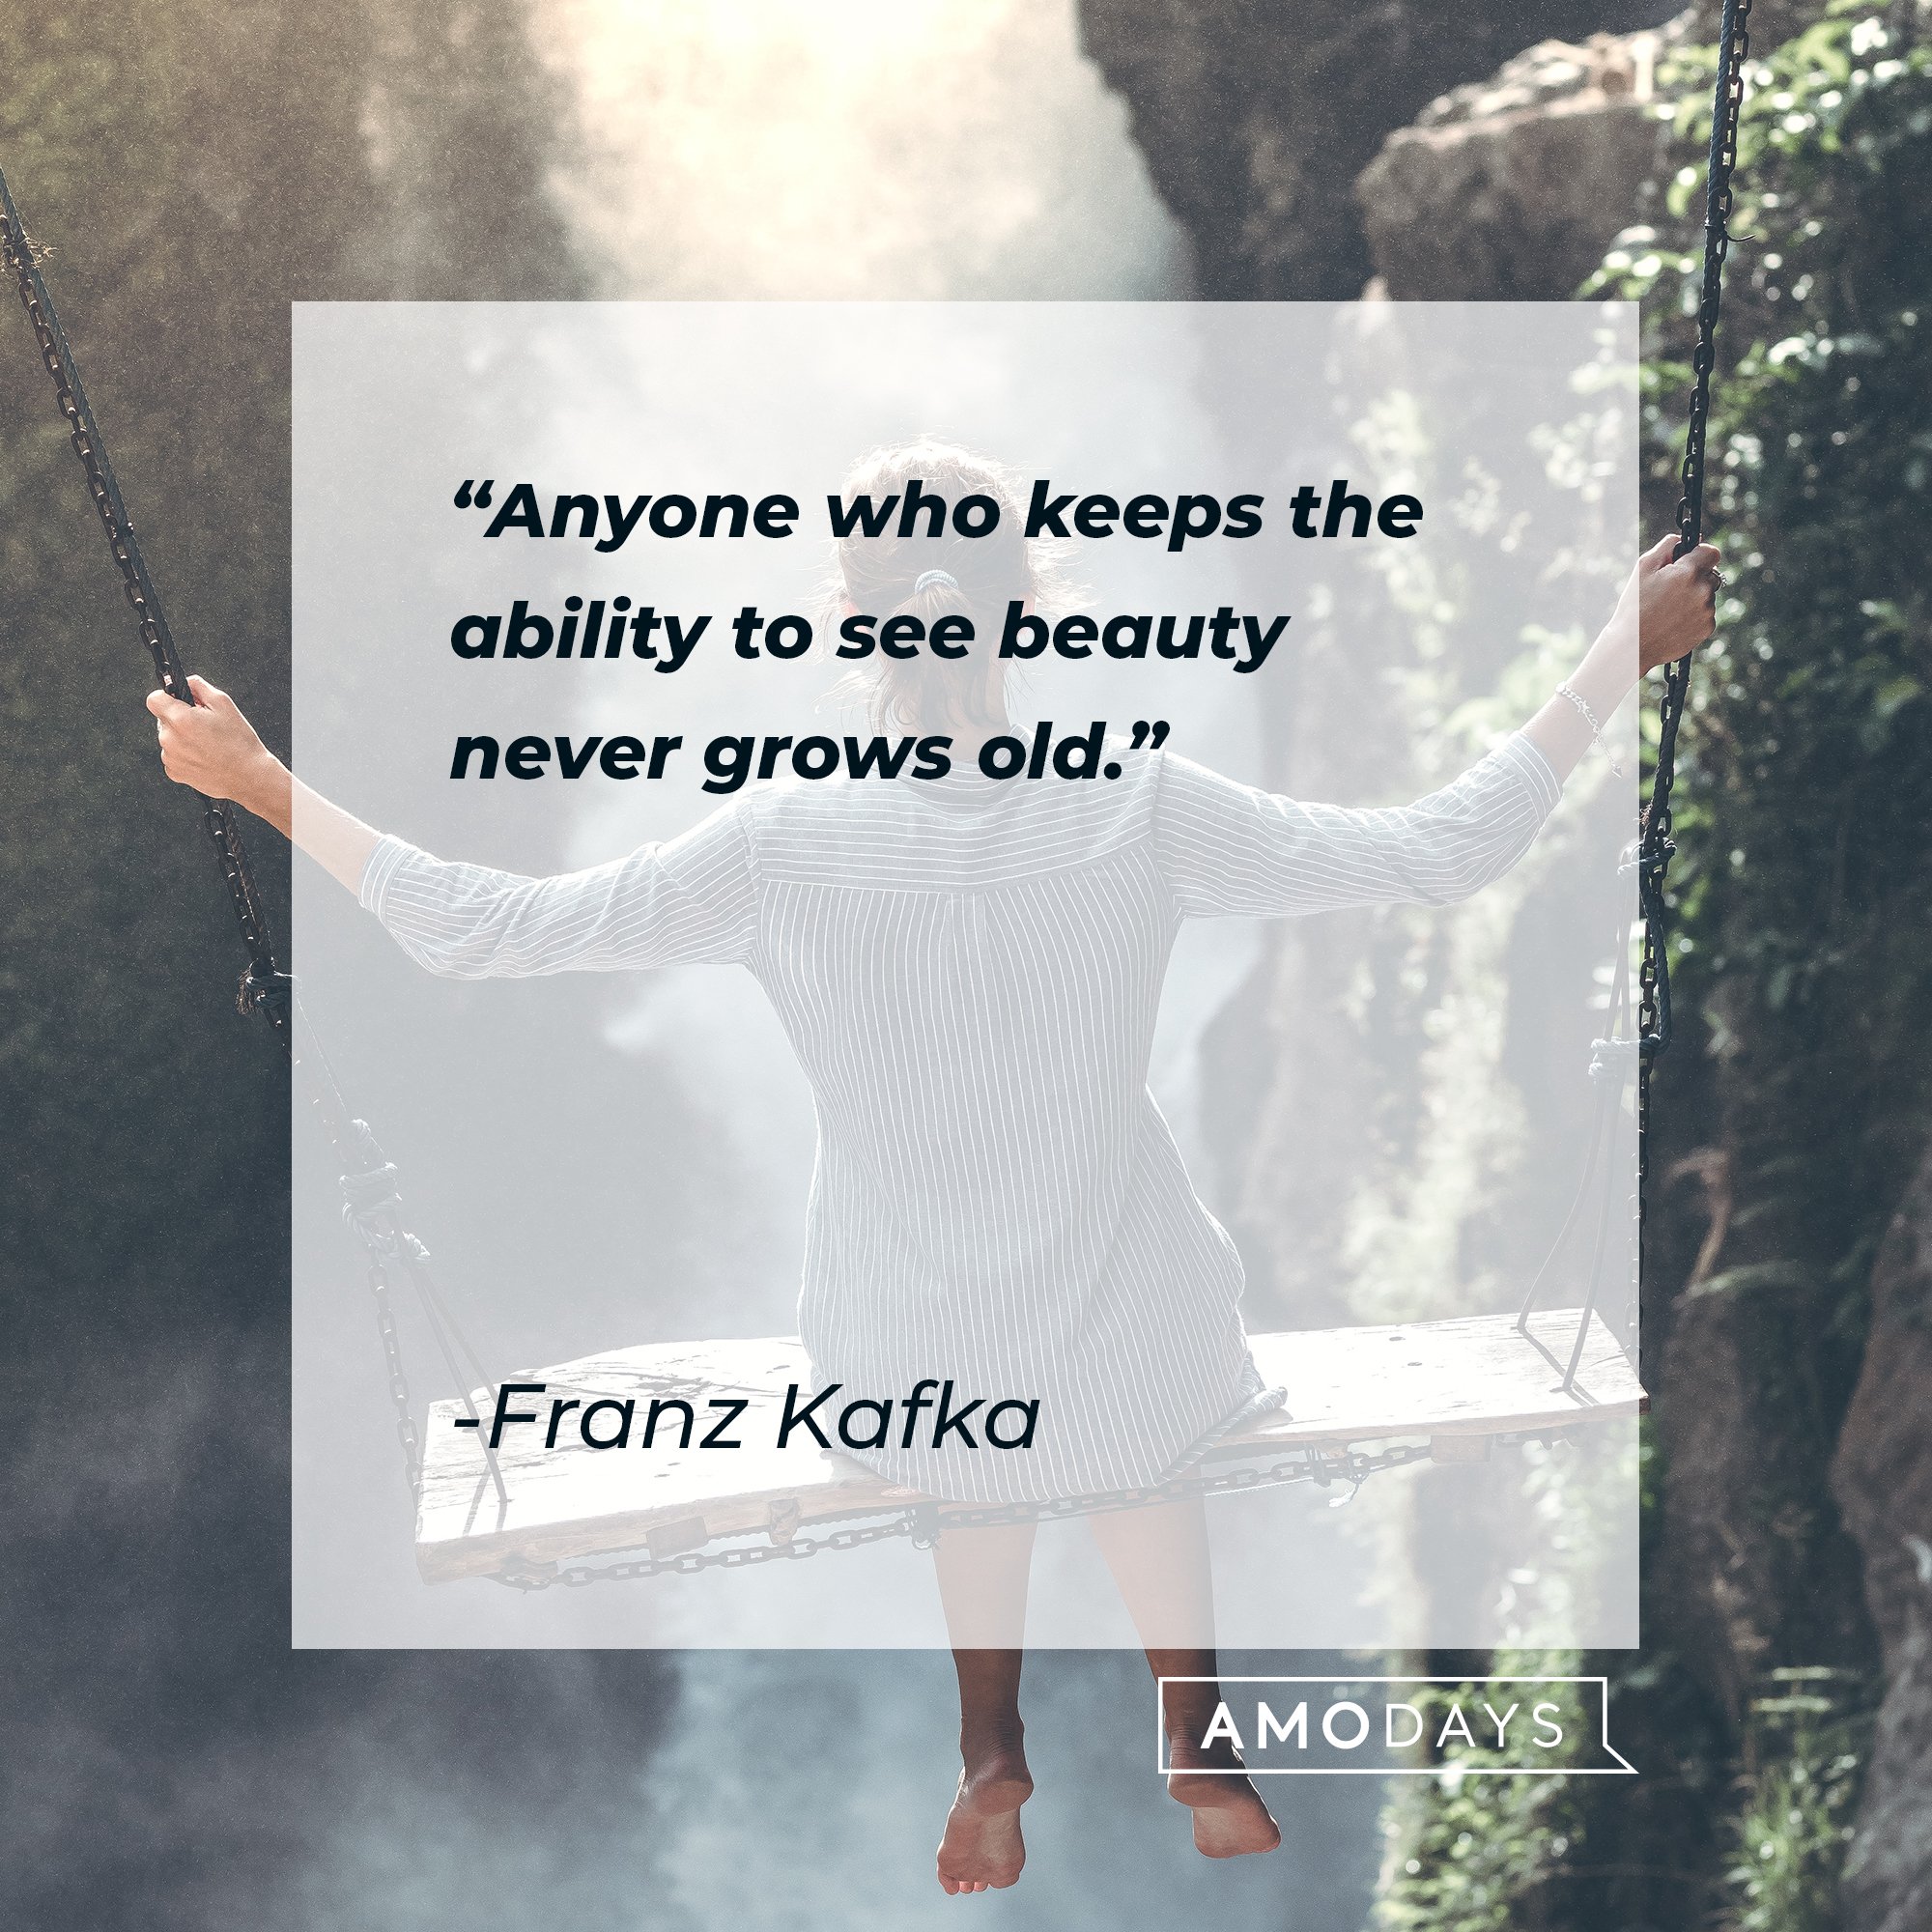  Franz Kafka’s quote: "Anyone who keeps the ability to see beauty never grows old." |  Image: AmoDays